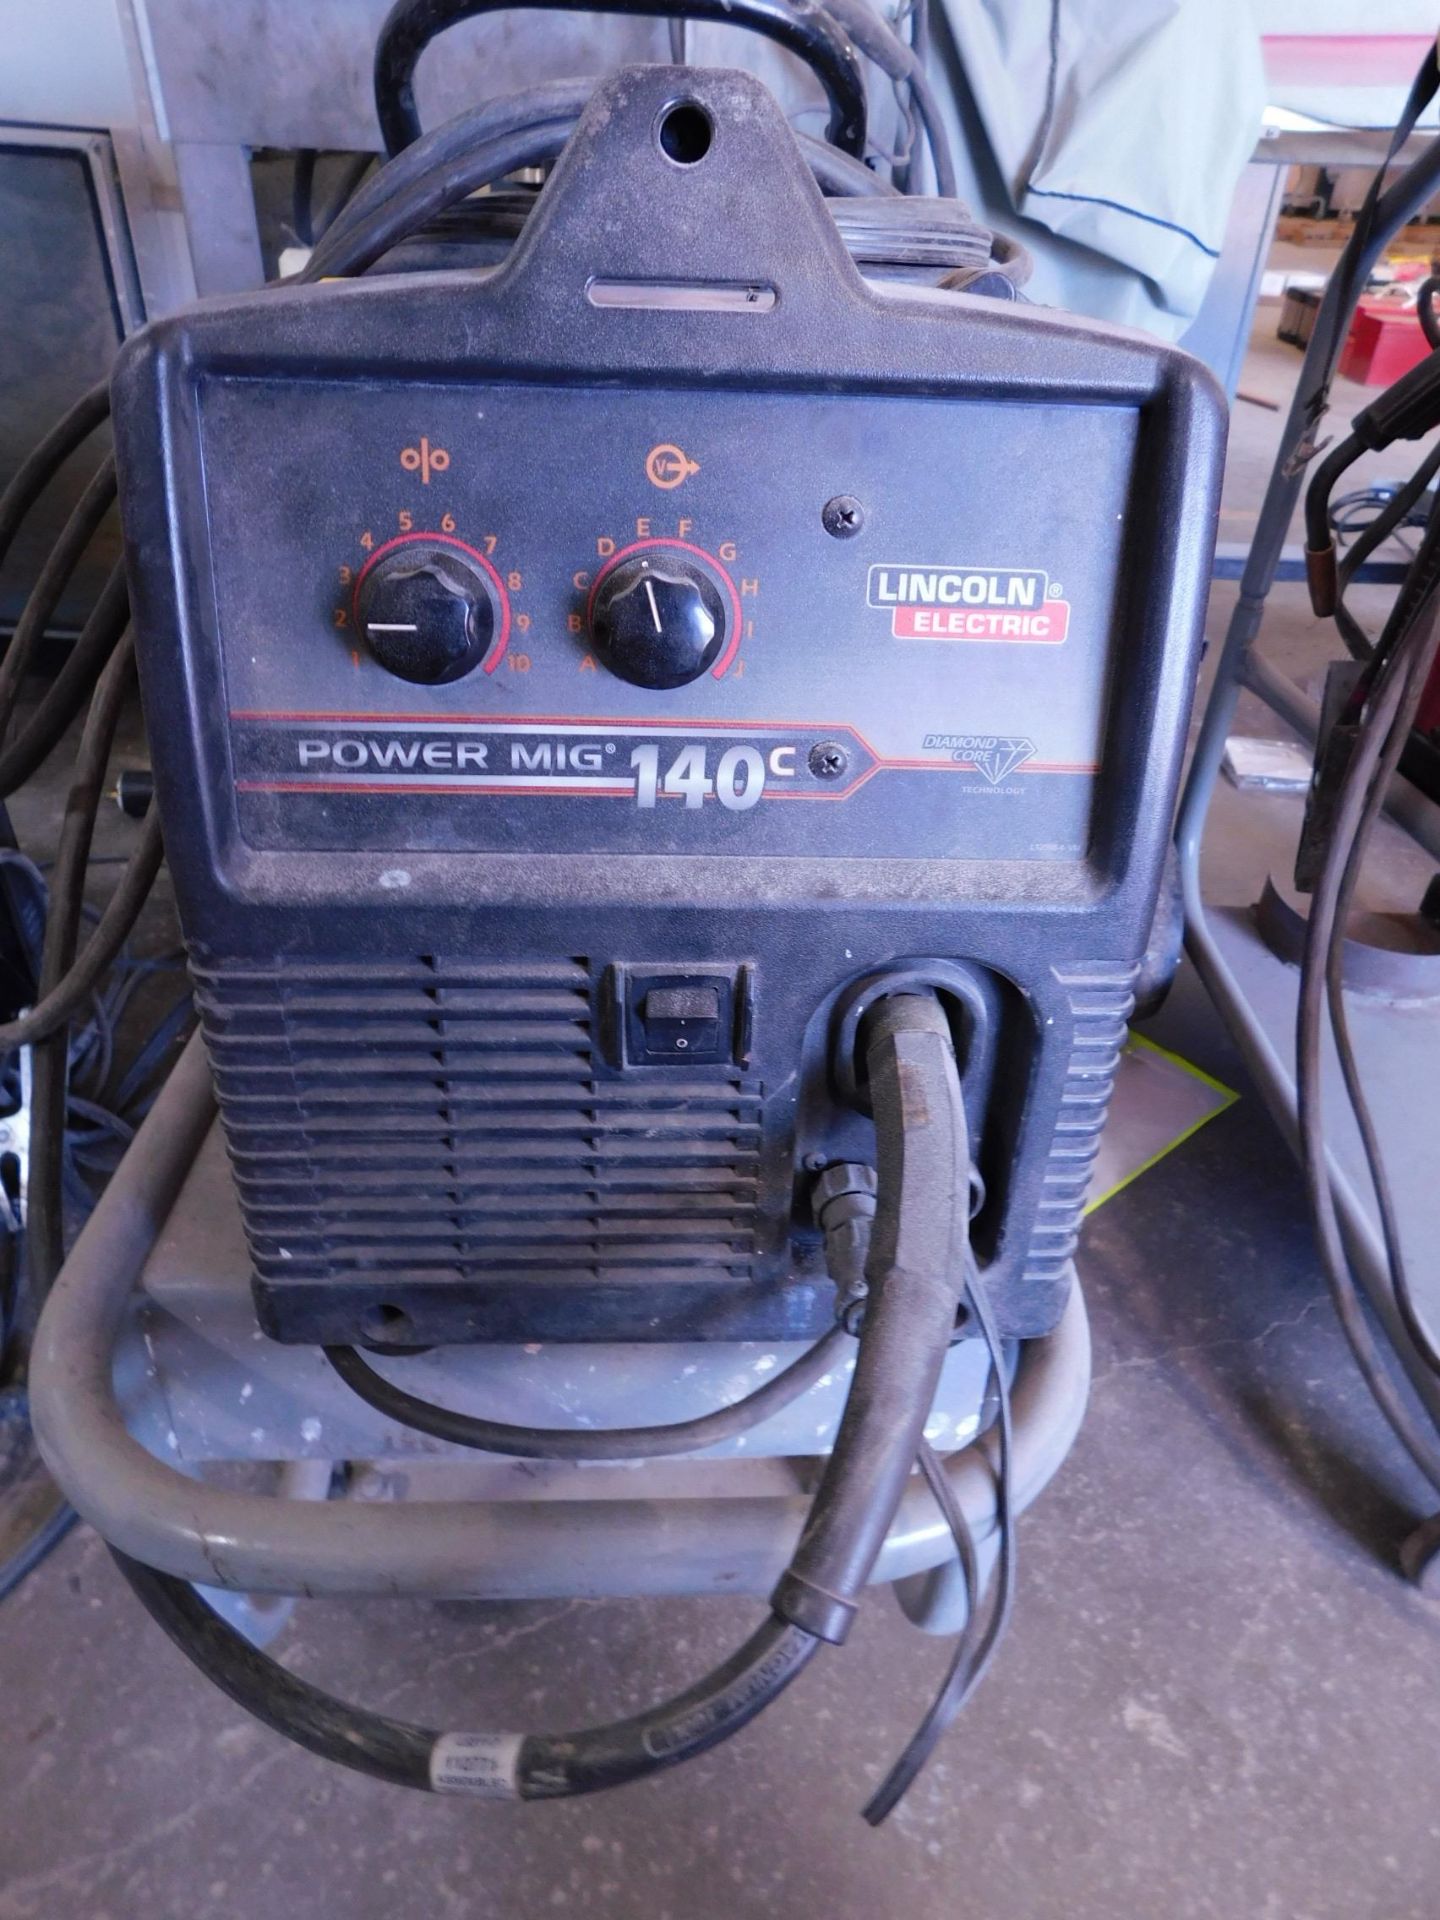 Lincoln Power Mig 140C Mig Welder, 1 ph., 120 V SN M3071101314, with Cart